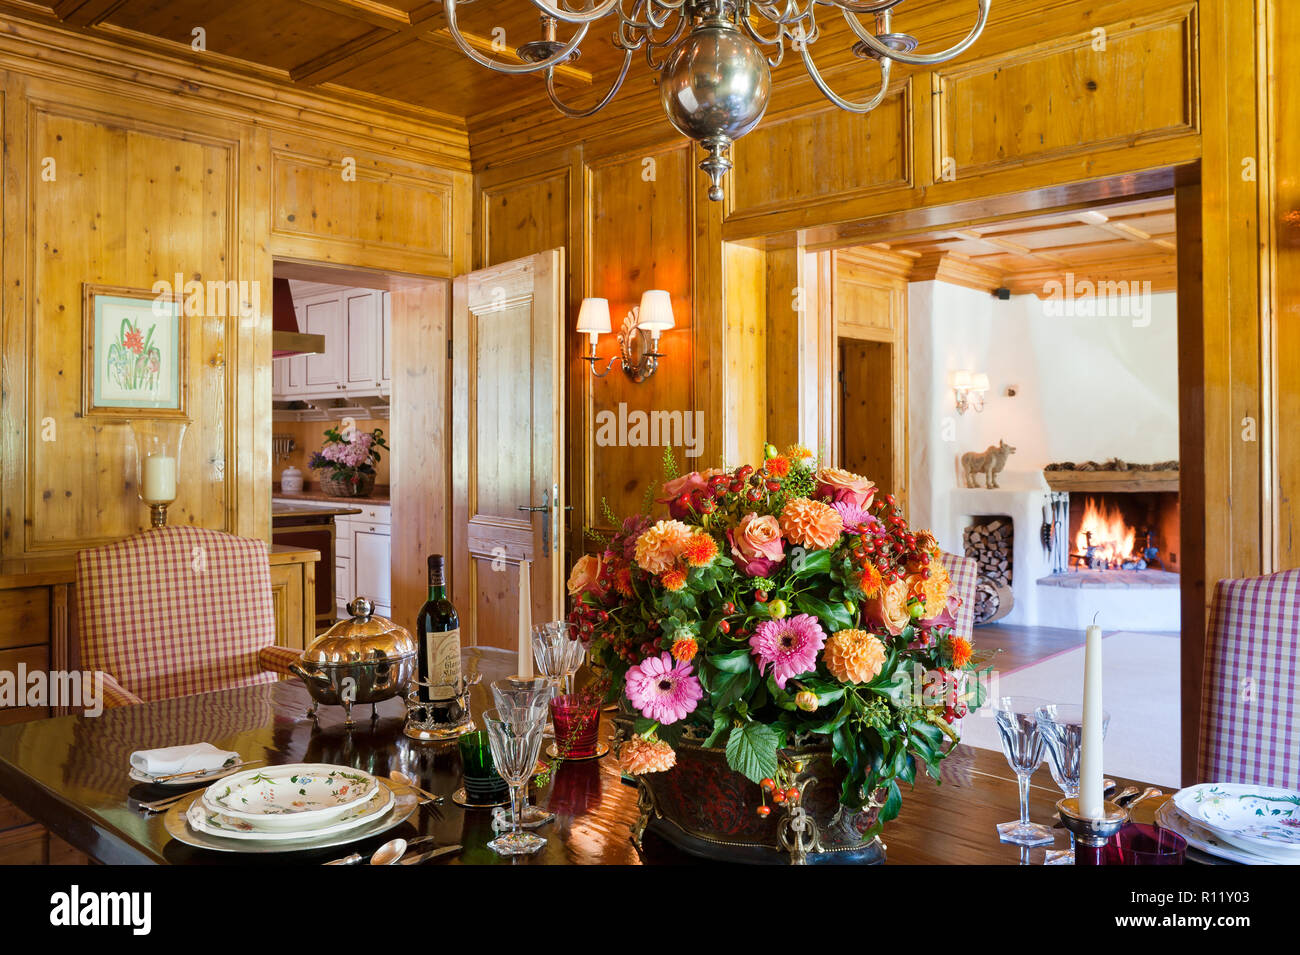 Dining room with wood panelling Stock Photo